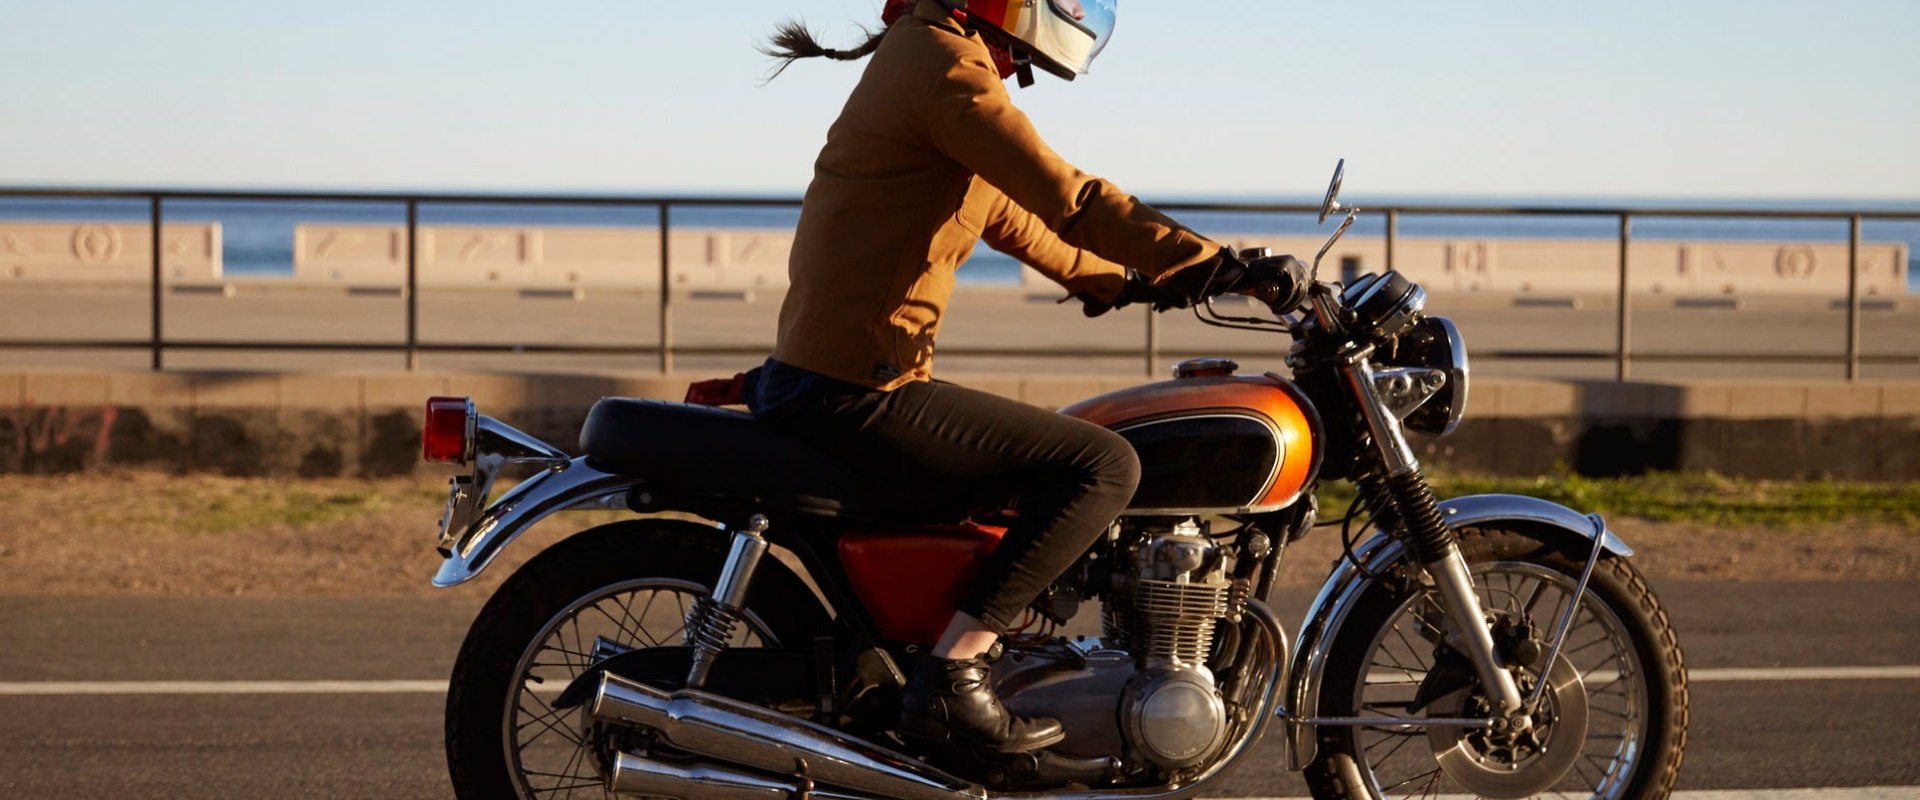 Affordable Motorcycle Insurance for New Riders